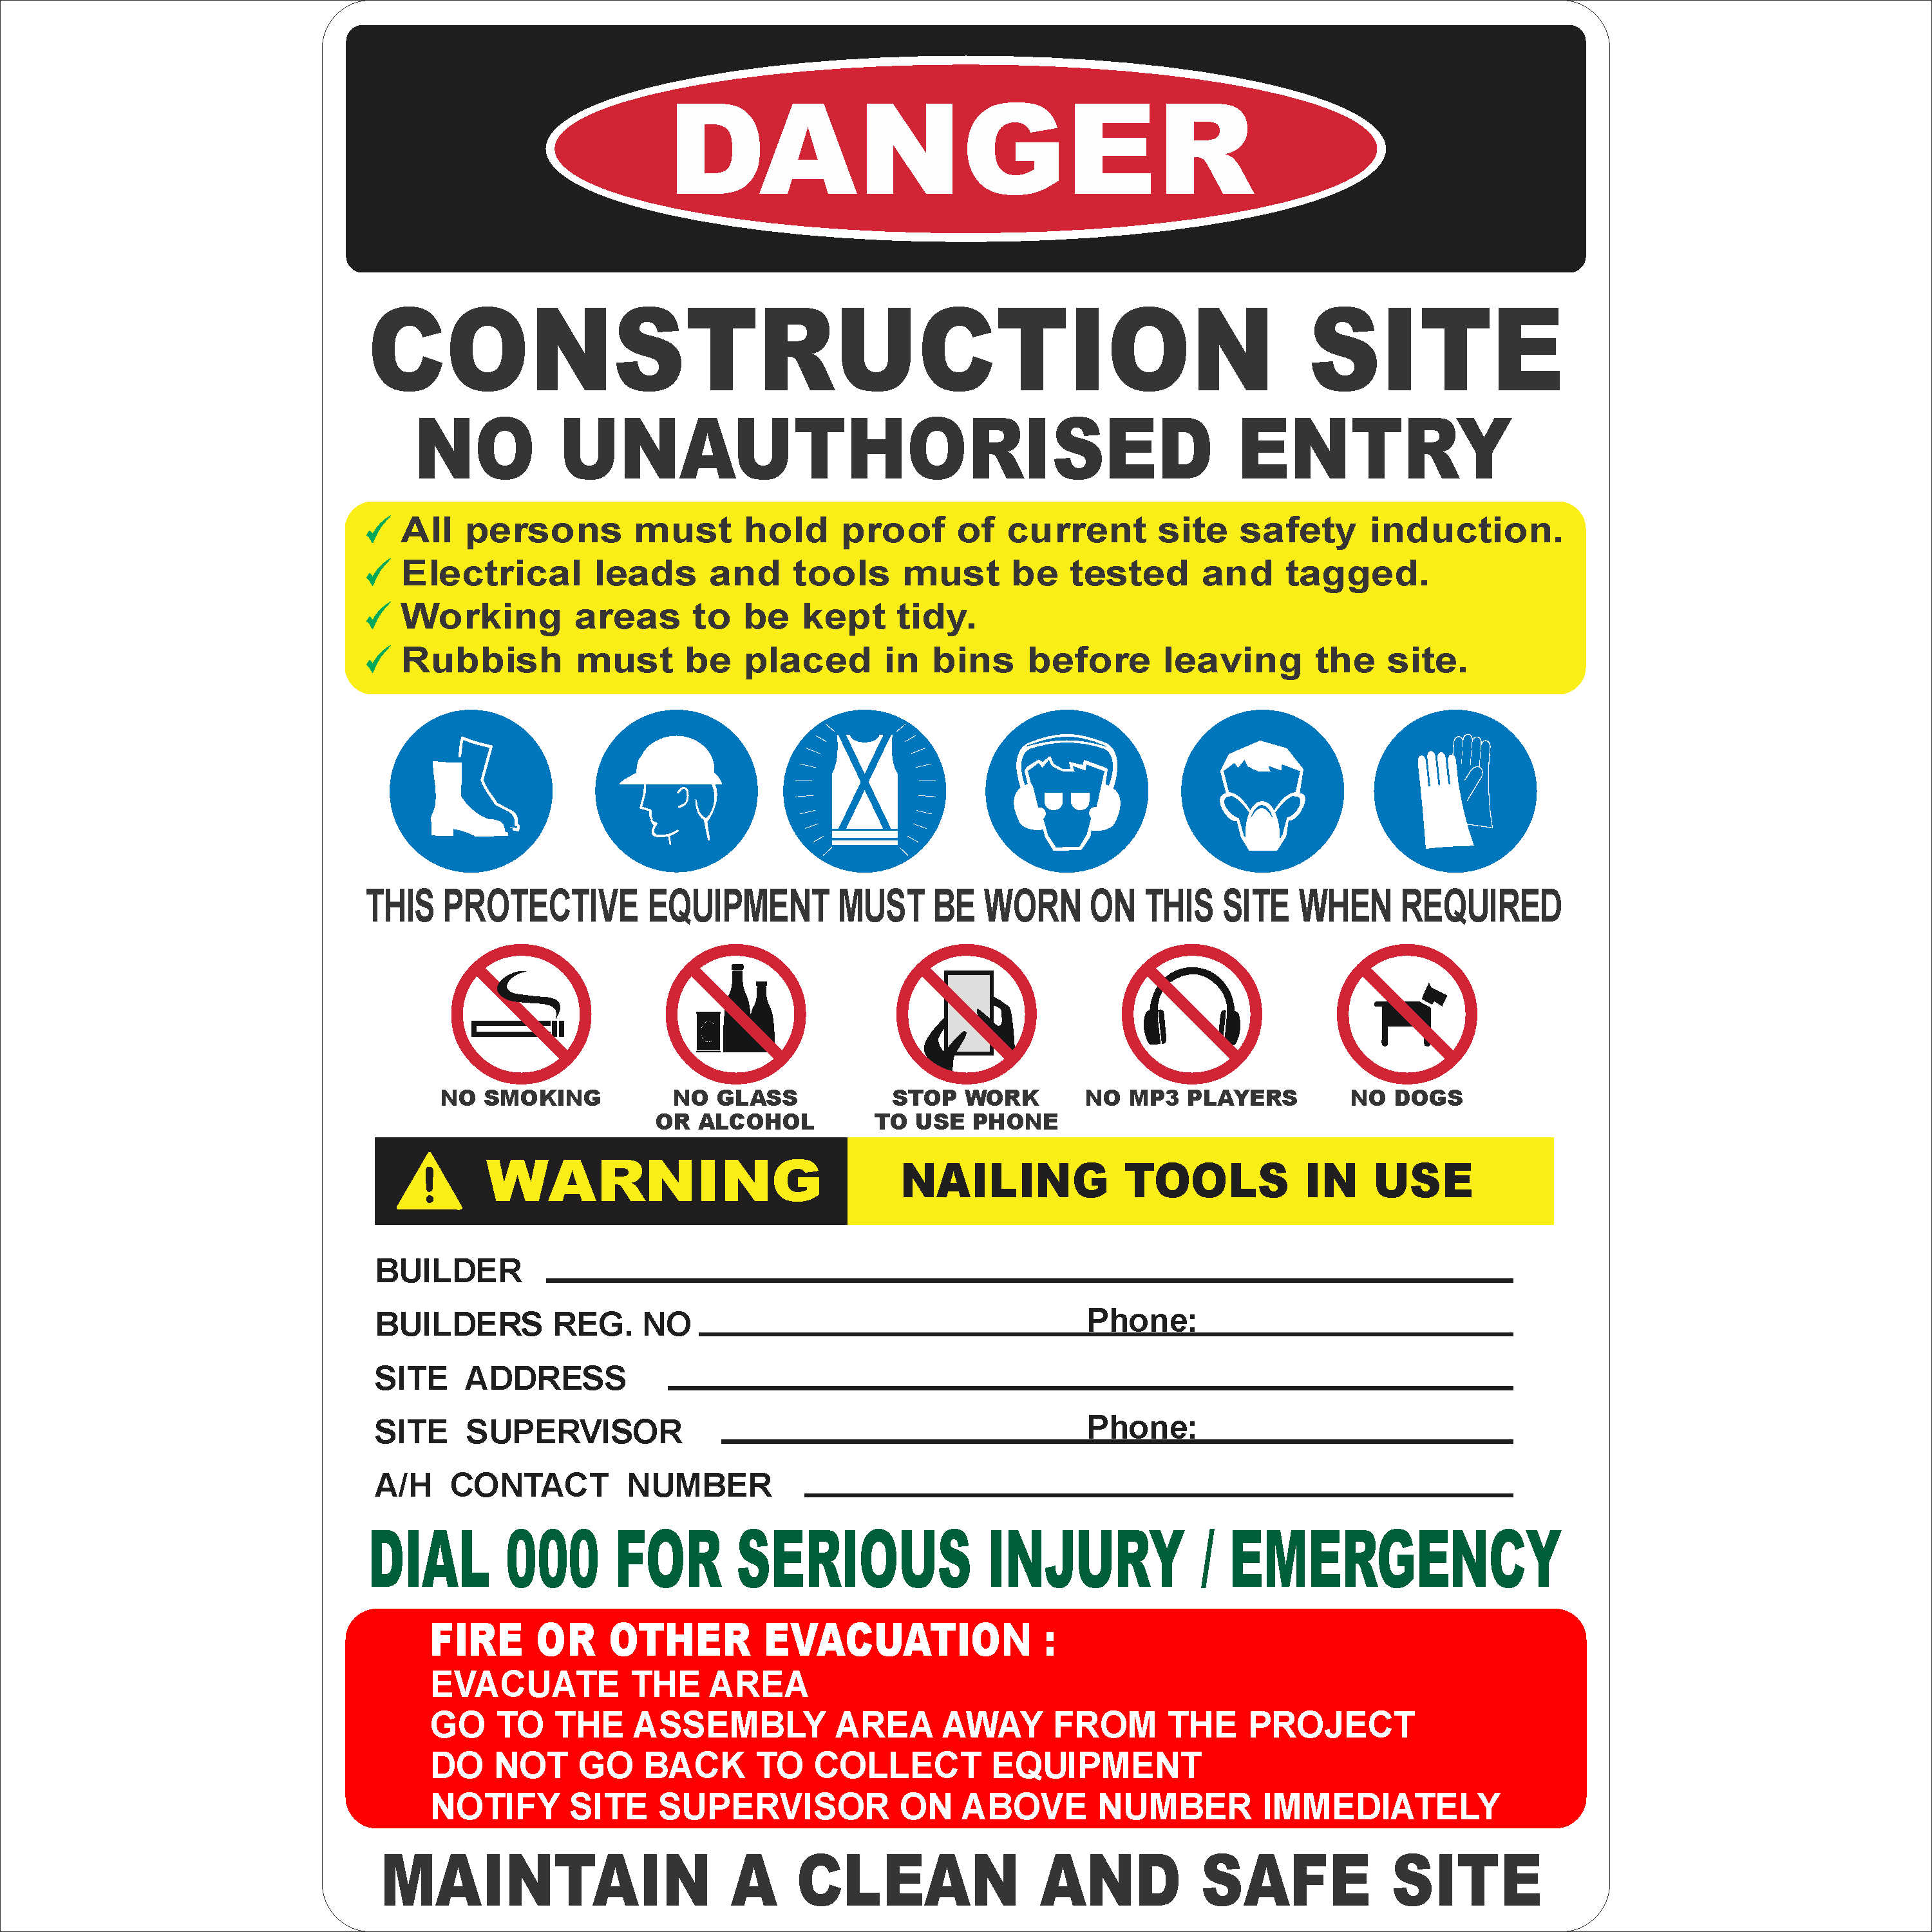 You need a safety induction to enter this site sign 